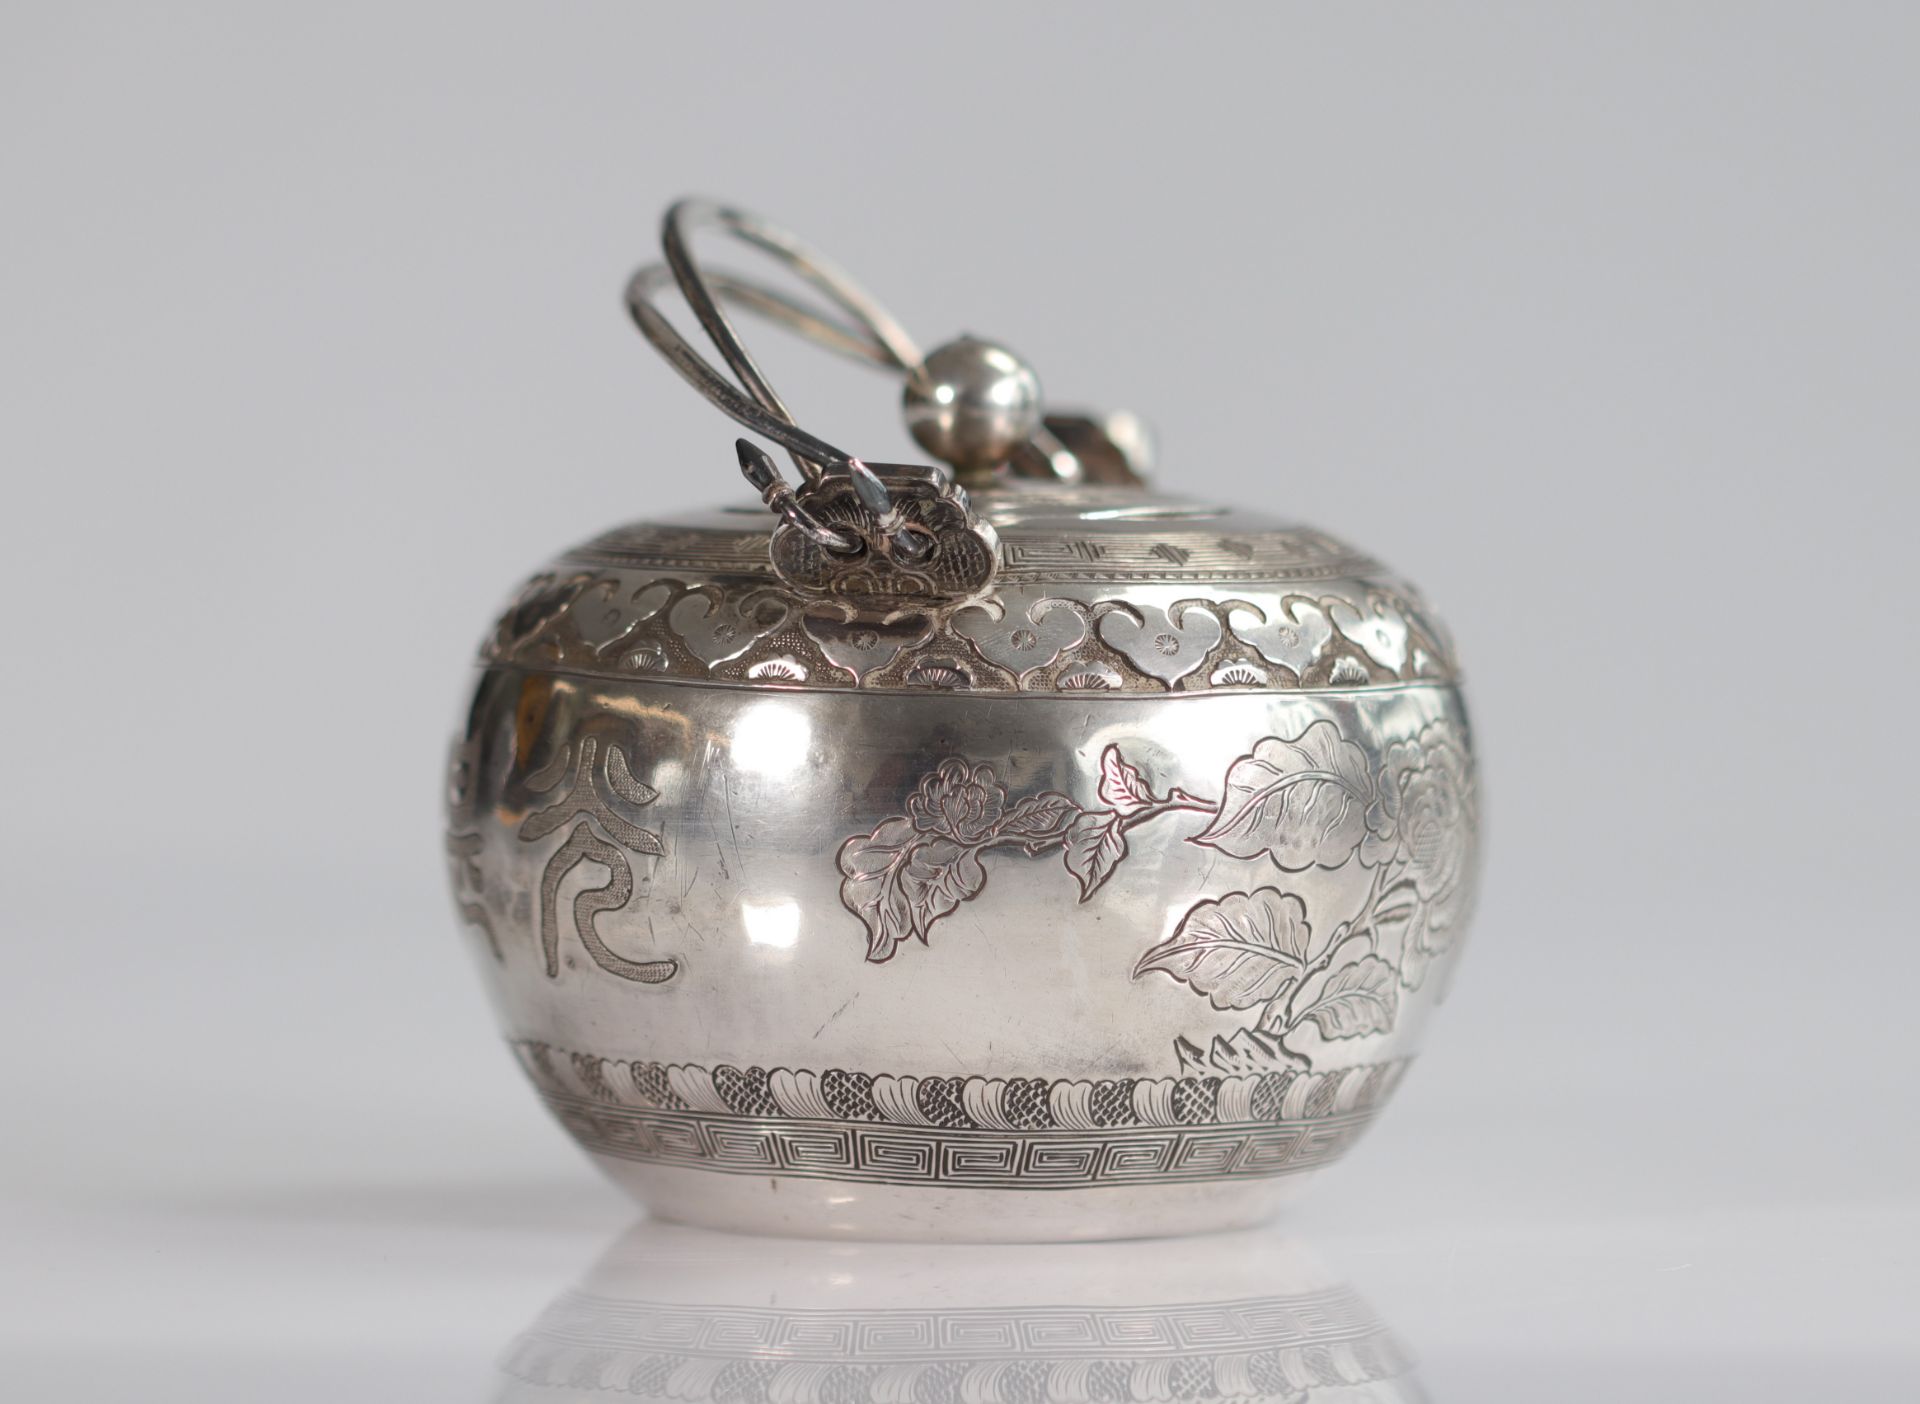 China silver teapot and cup - Image 4 of 11